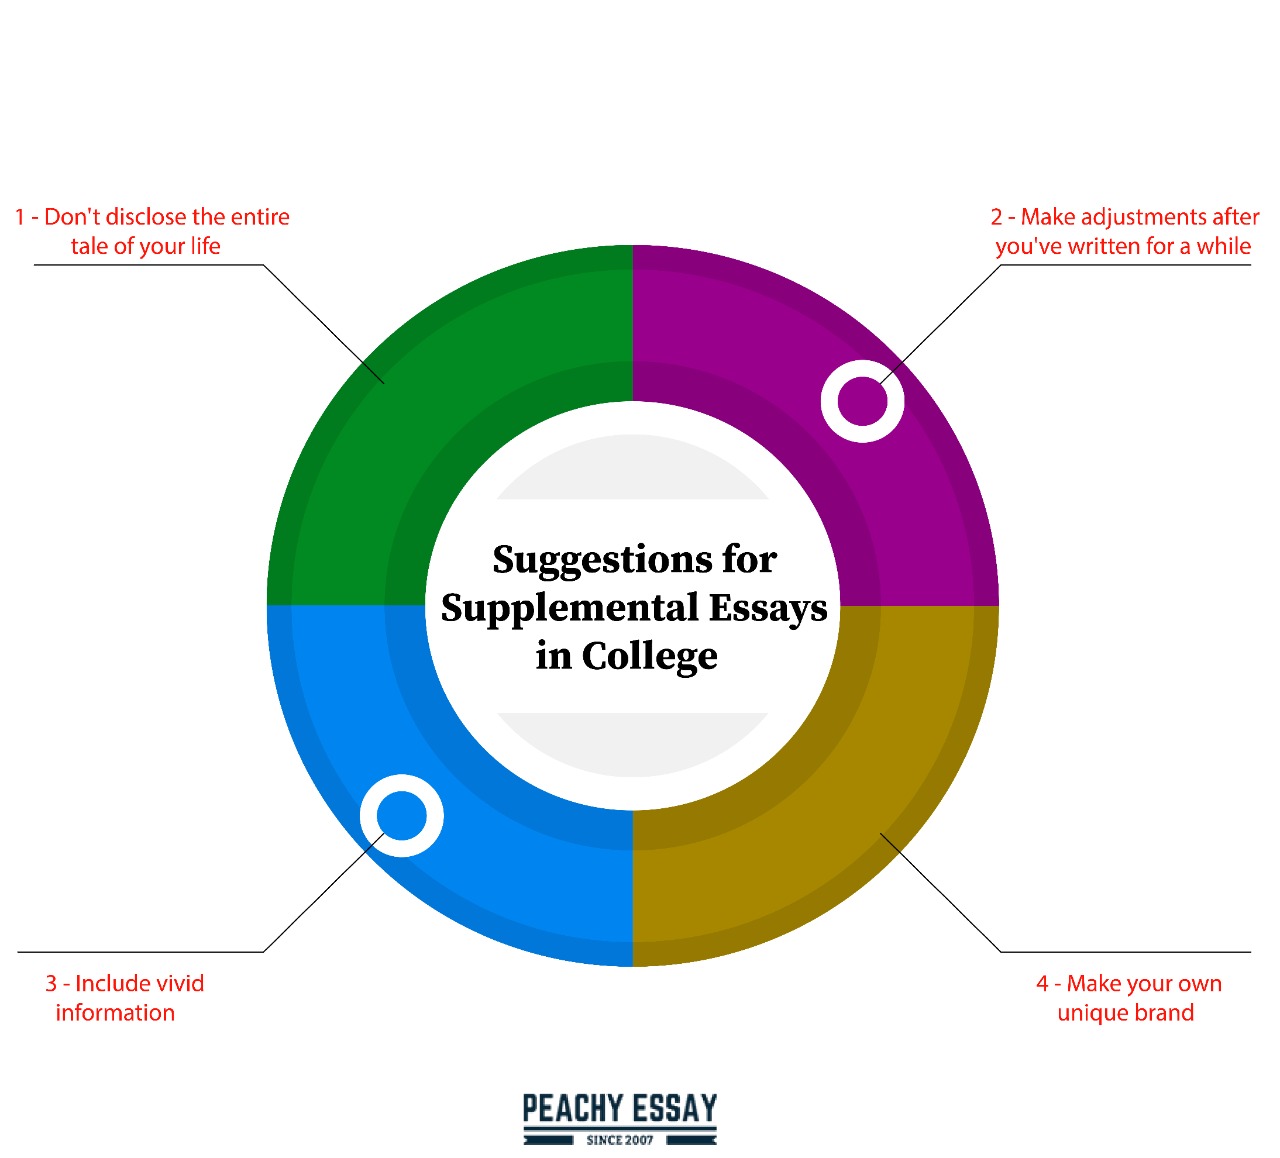 Tips for Supplemental Essays in College